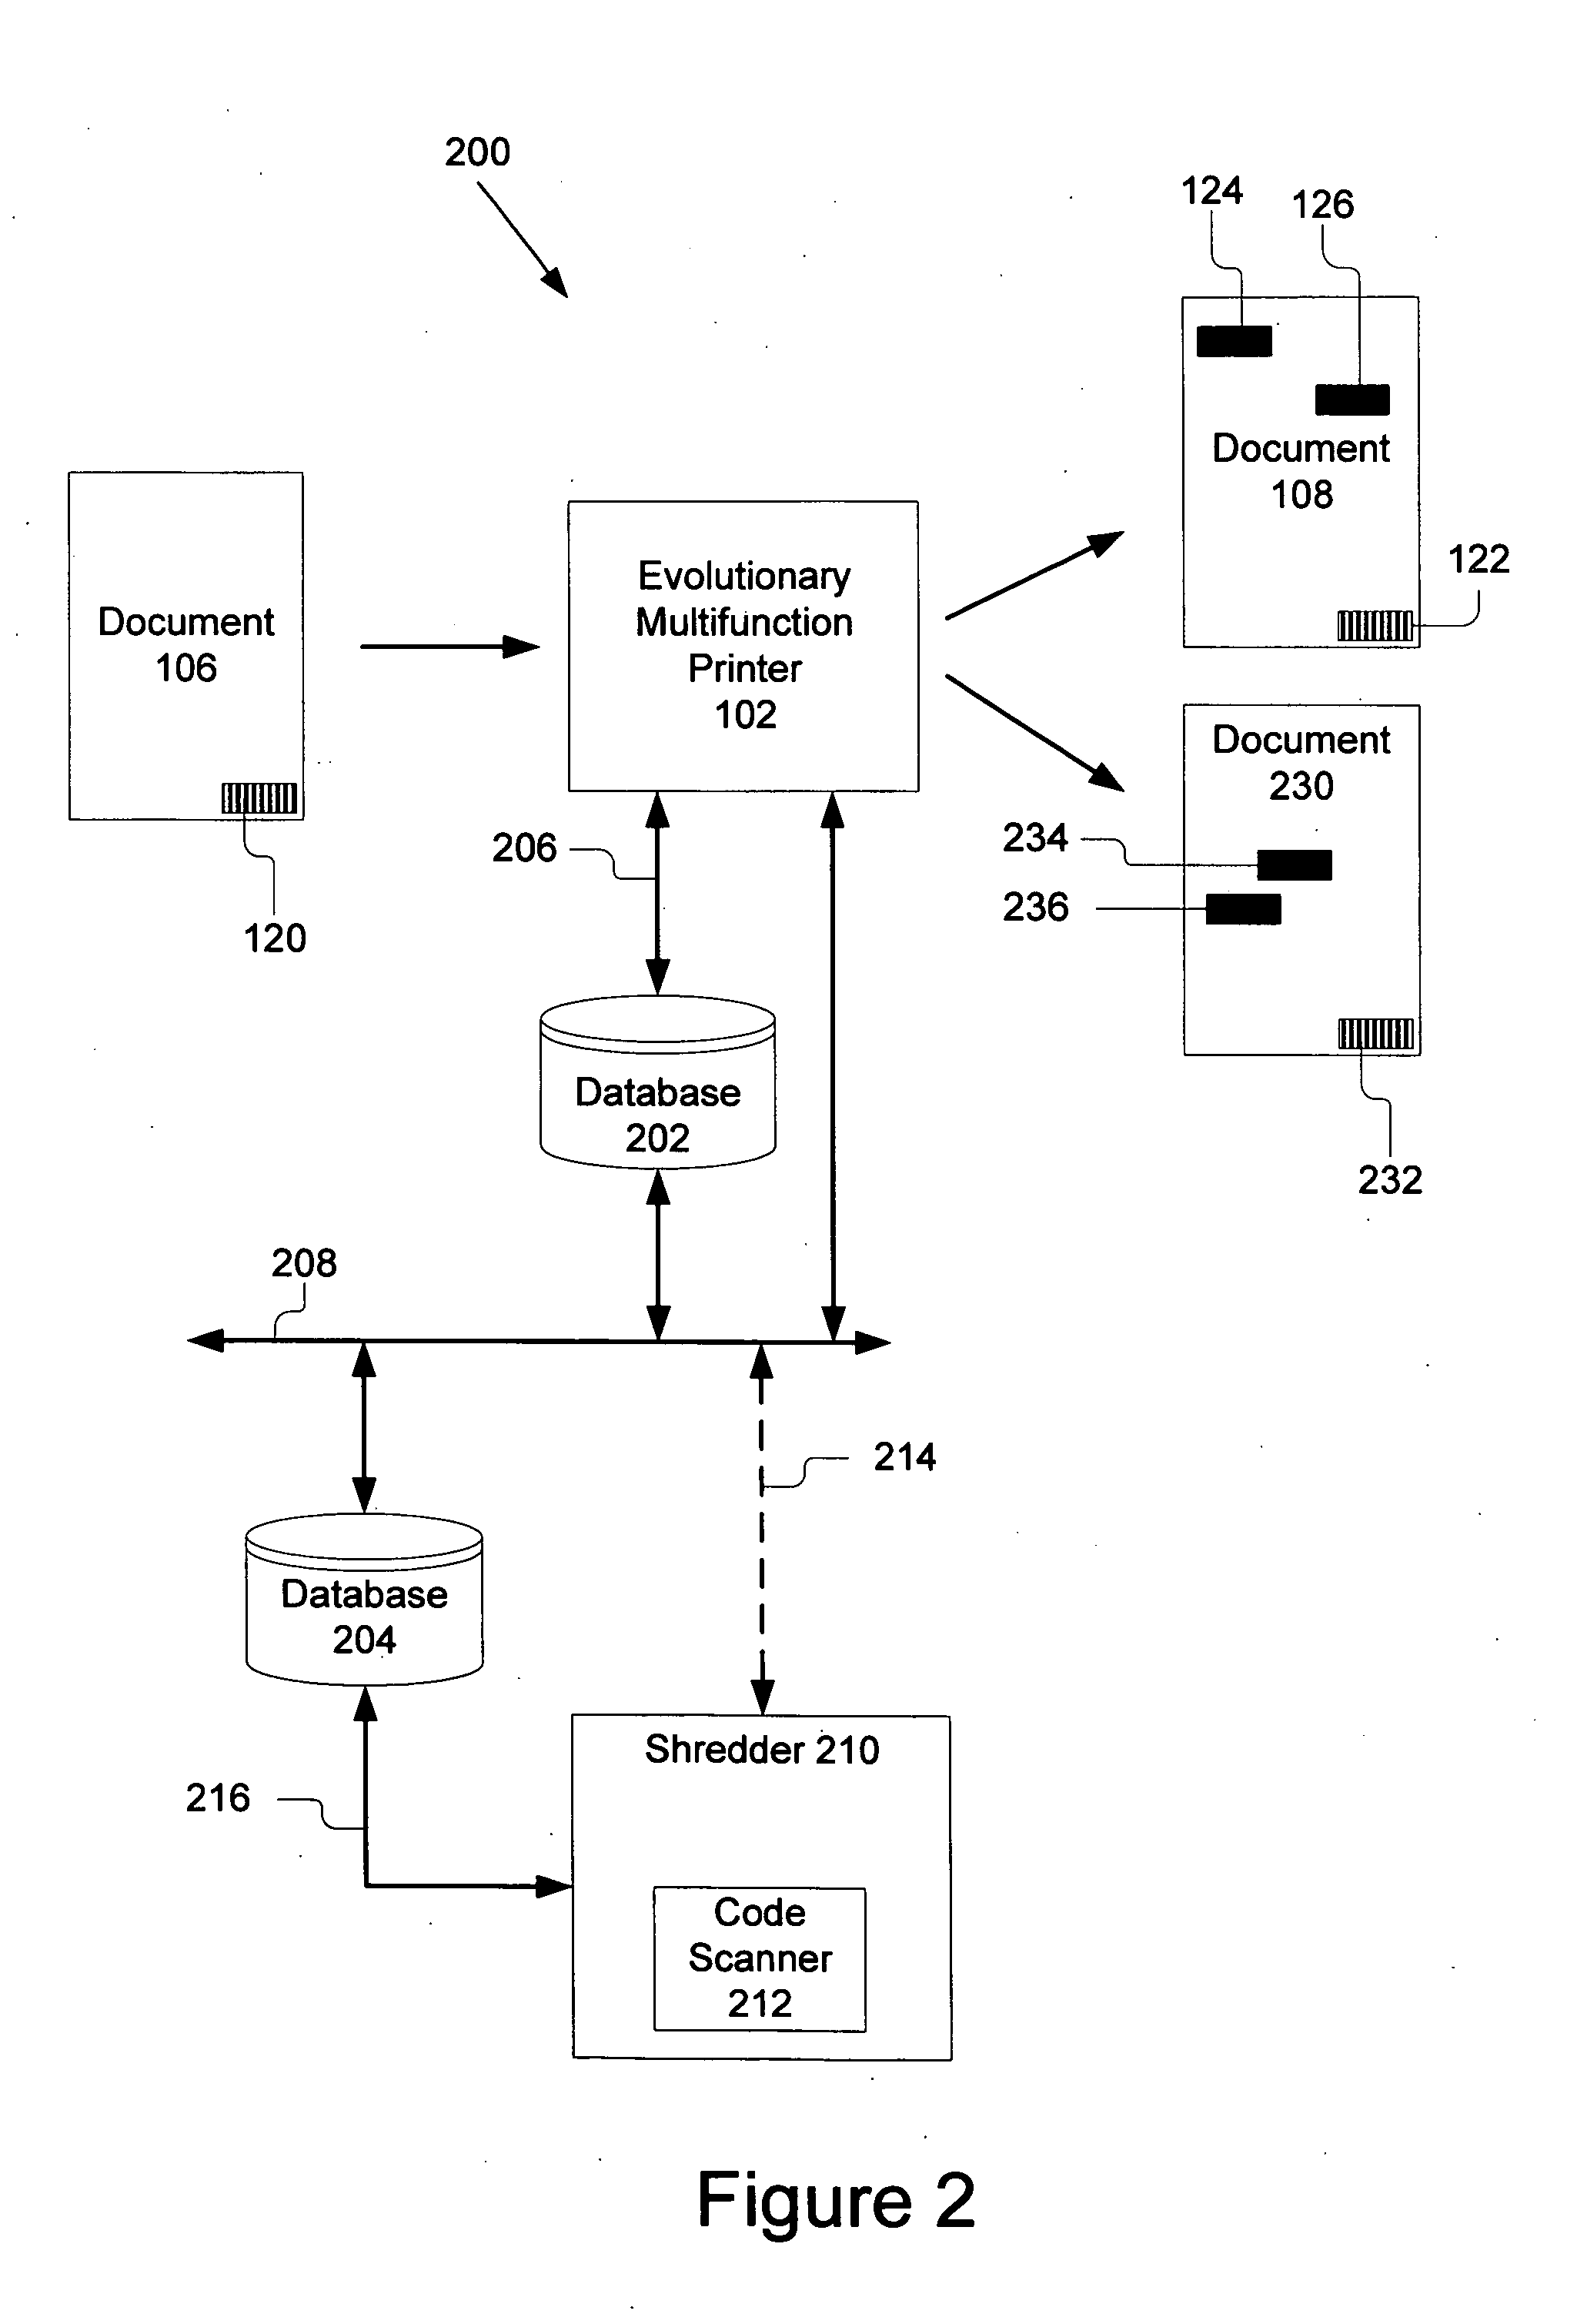 Systems and methods for generating and processing evolutionary documents